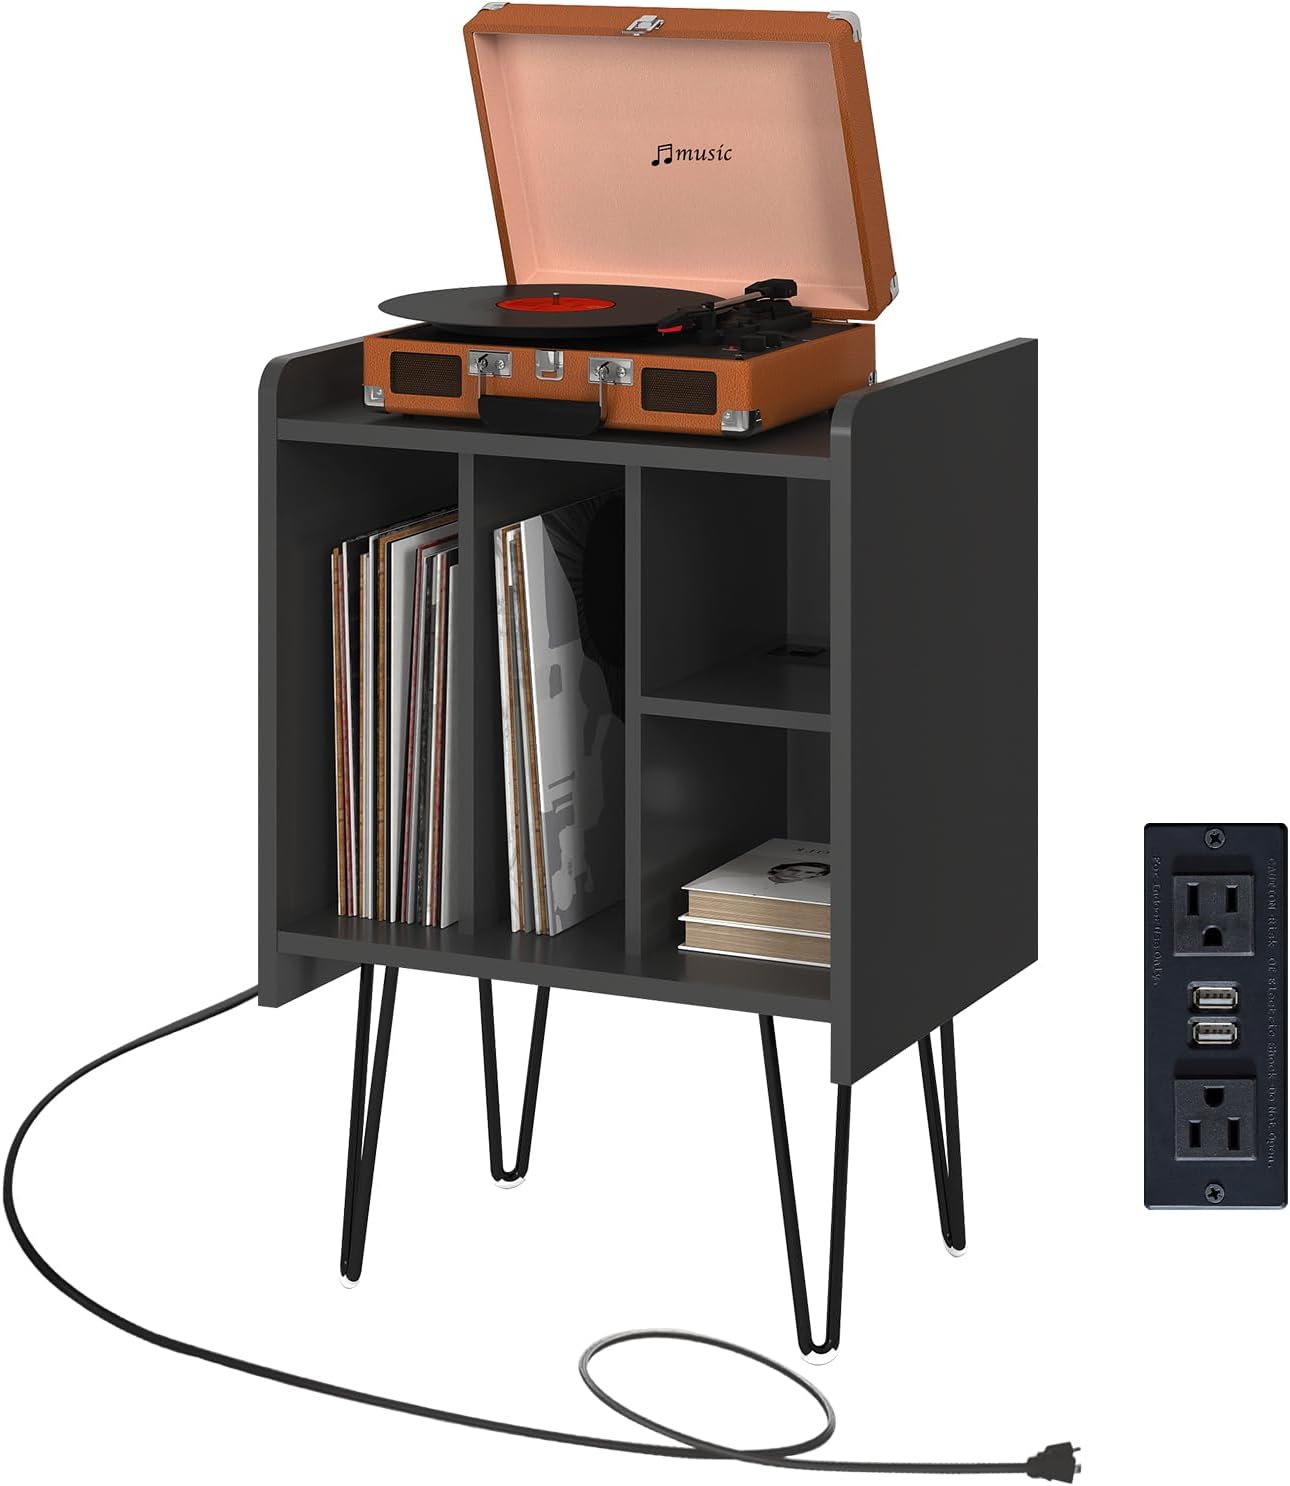 Sigoryi 2-Shelf Record Storage Cabinet, Audio Record Rack 2 Floor Sliding Door Audio Record Rack Stands with USB Interface for Living Room Bedroom(W18.1 x D13.8 x H26.4) - image 1 of 7